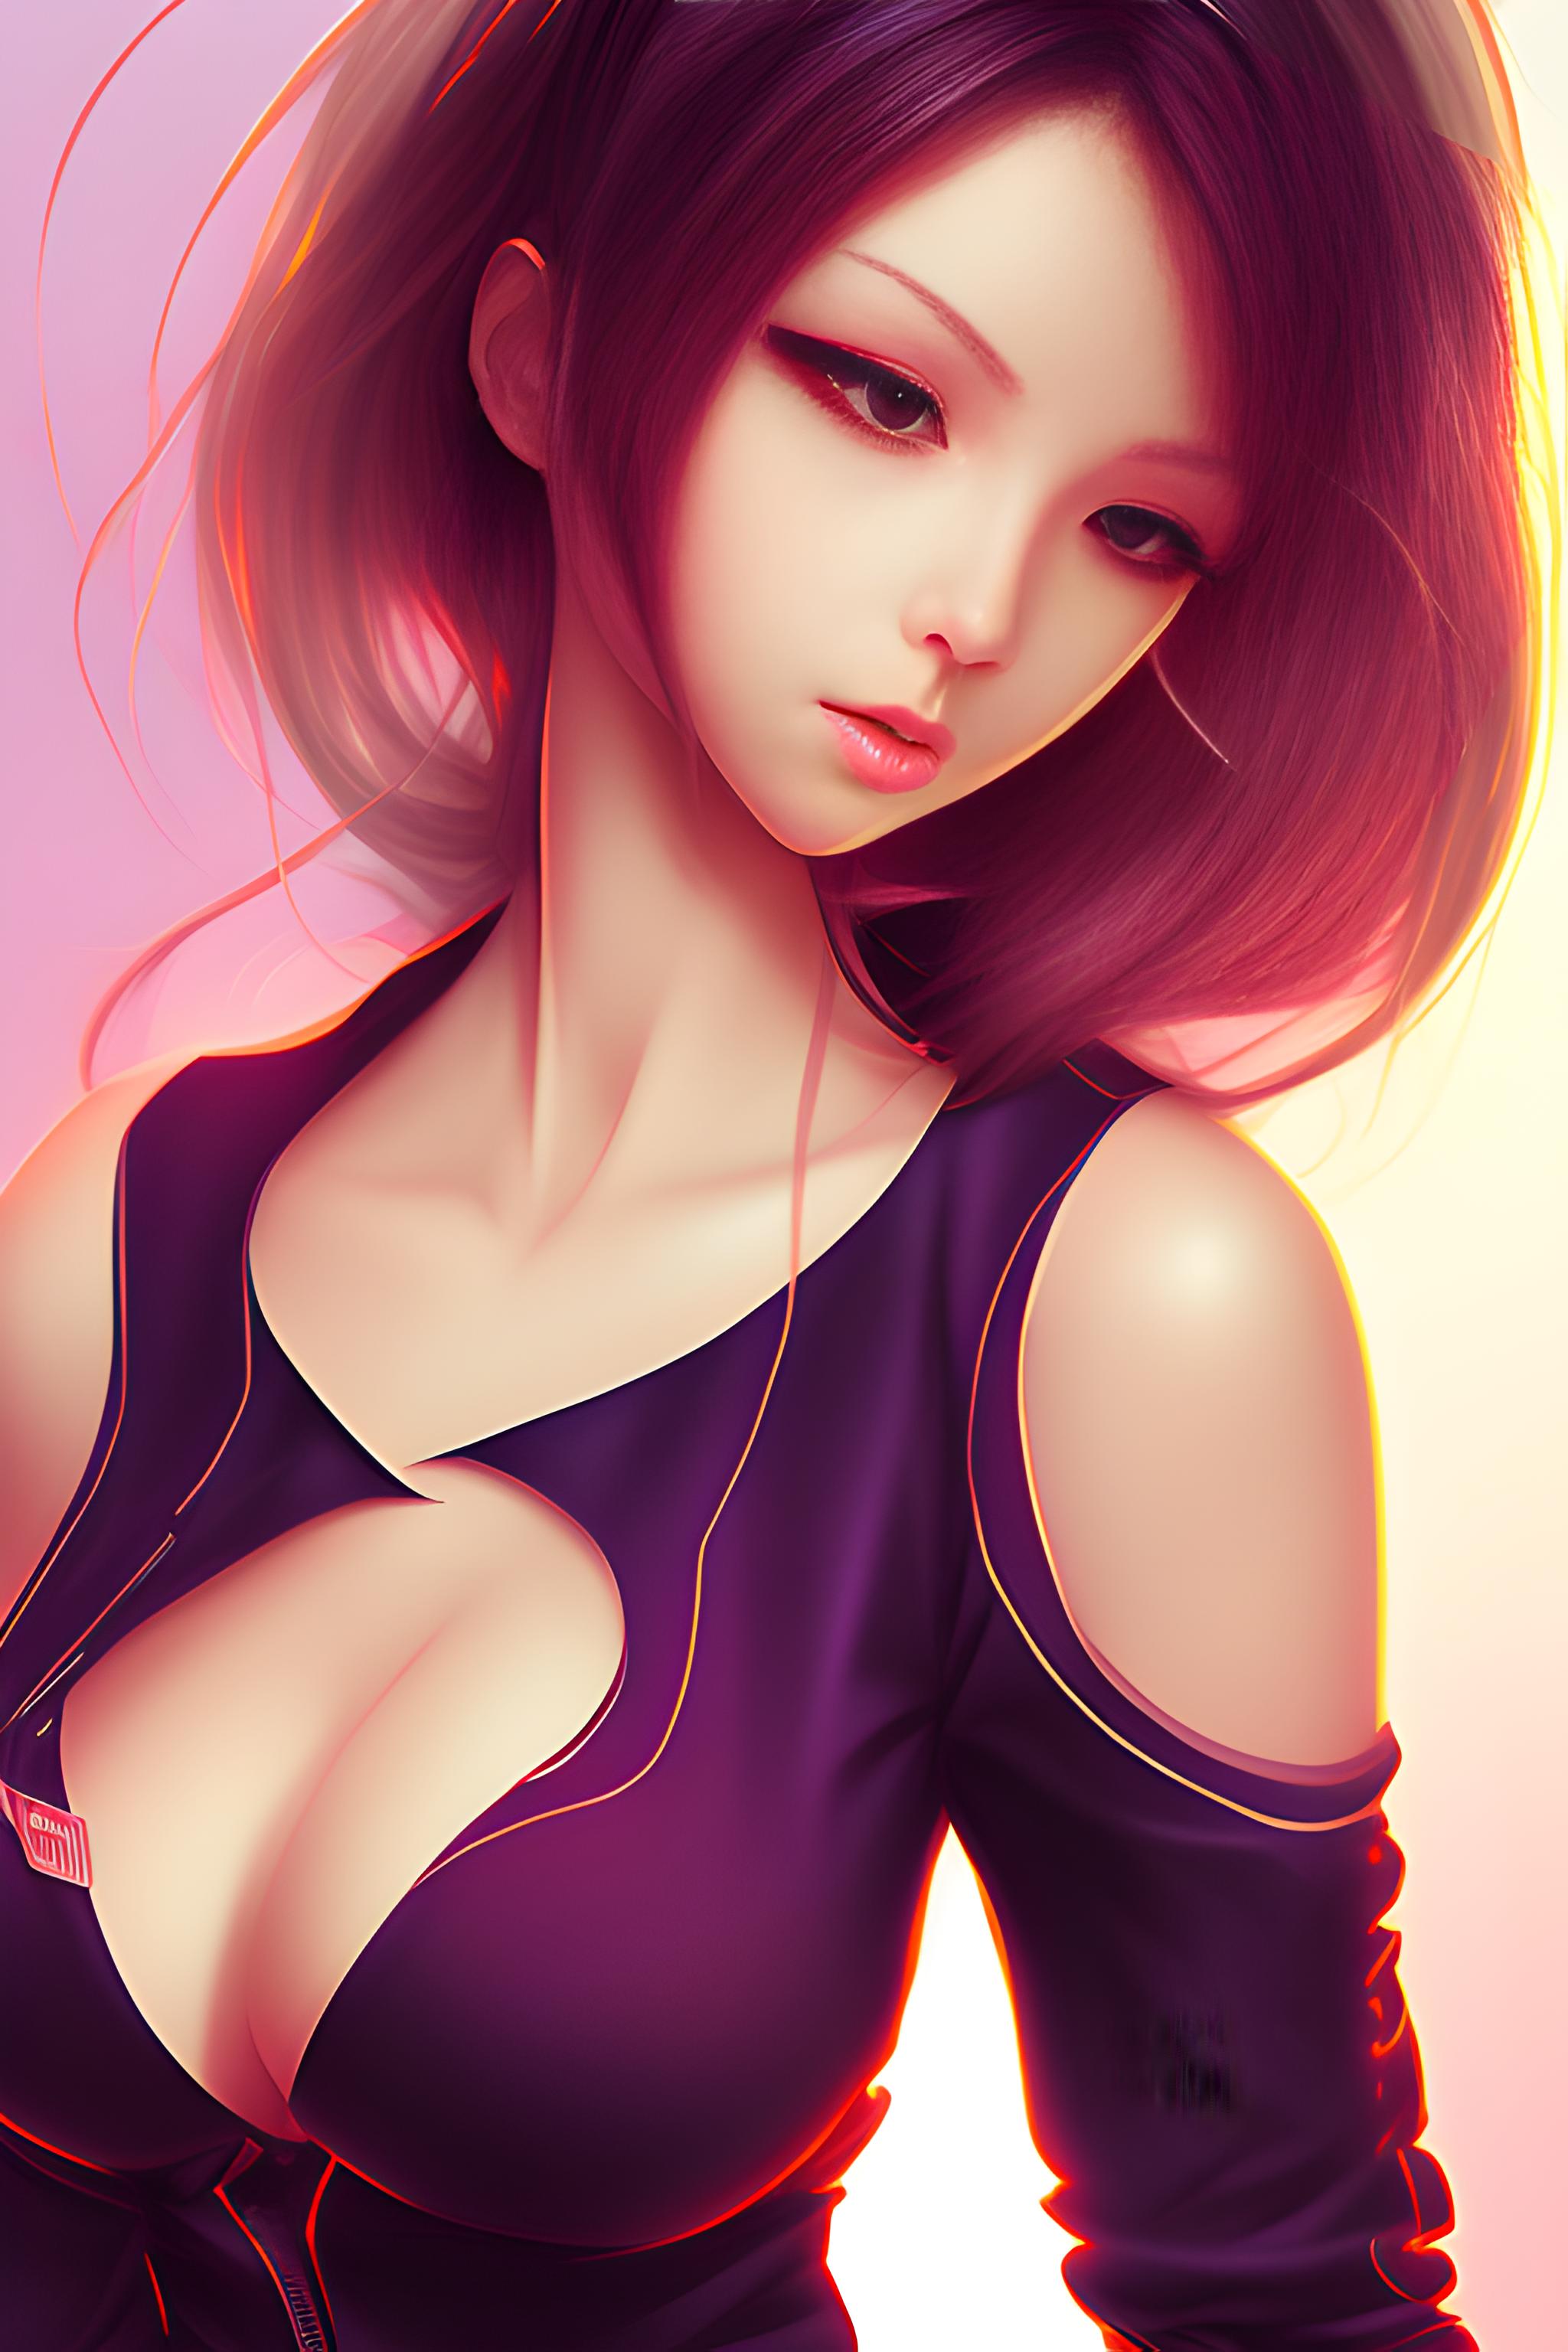 Hot and very sexy anime girl | Wallpapers.ai